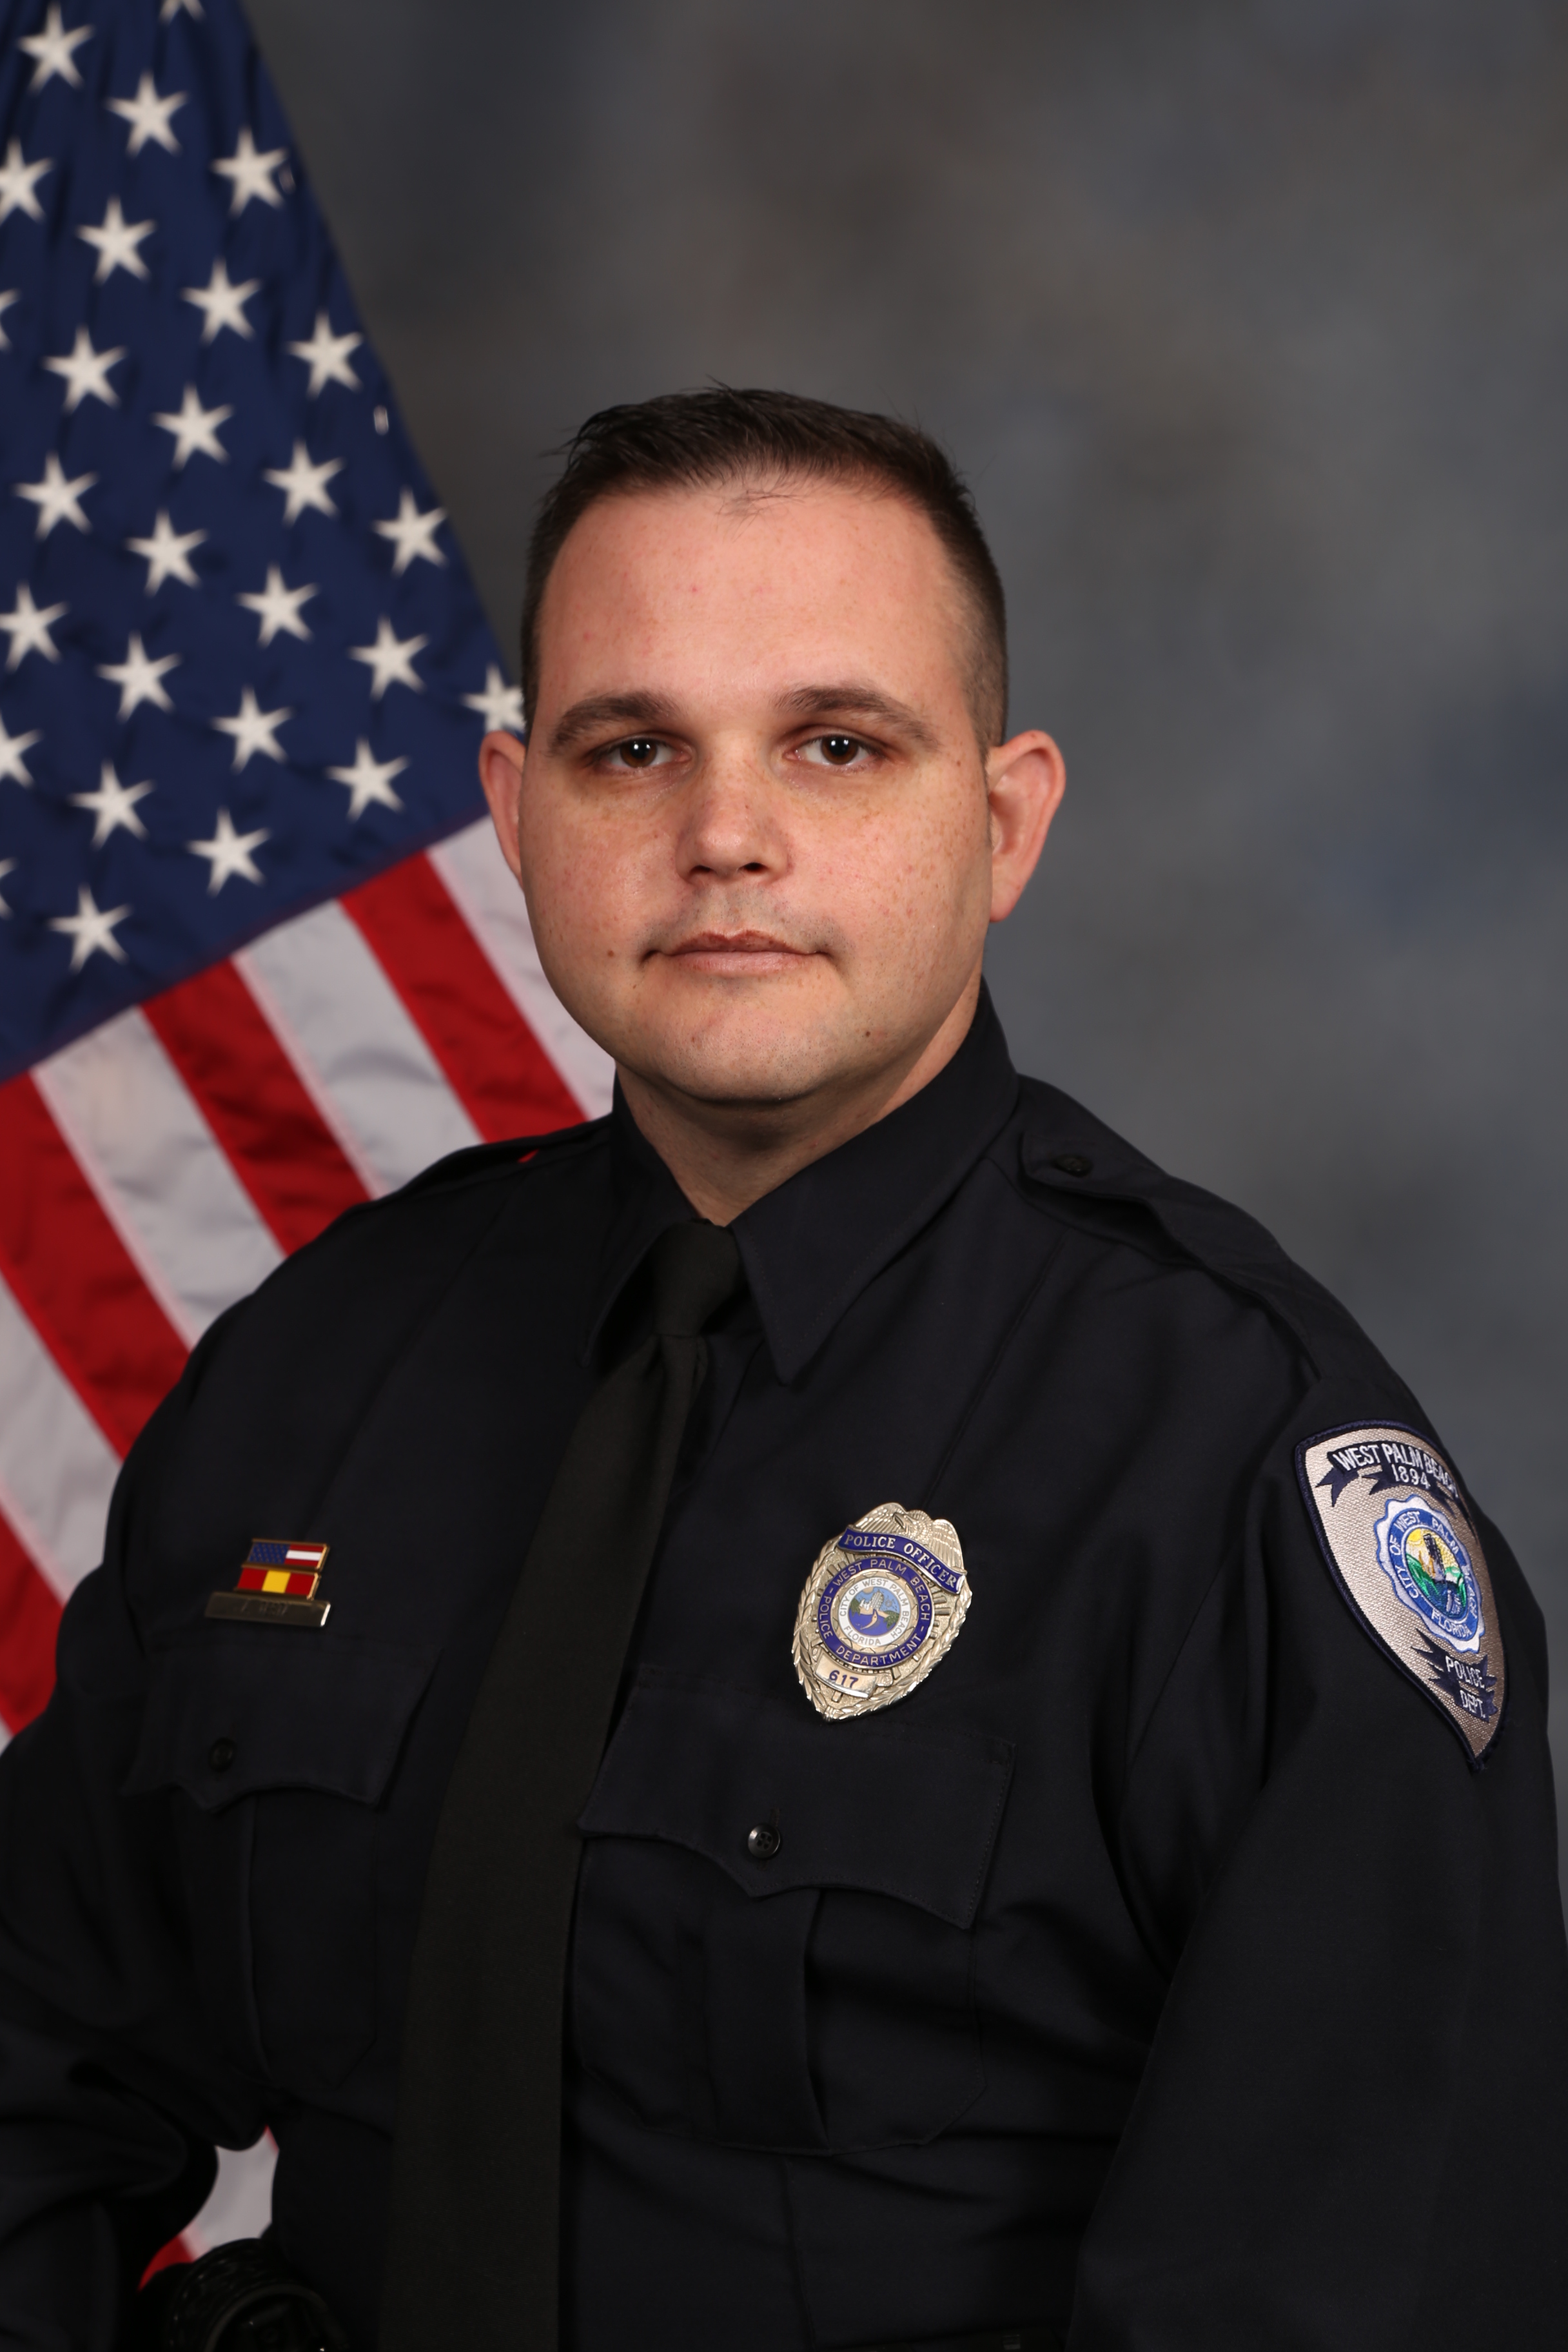 Police Officer Anthony Christopher Testa | West Palm Beach Police Department, Florida